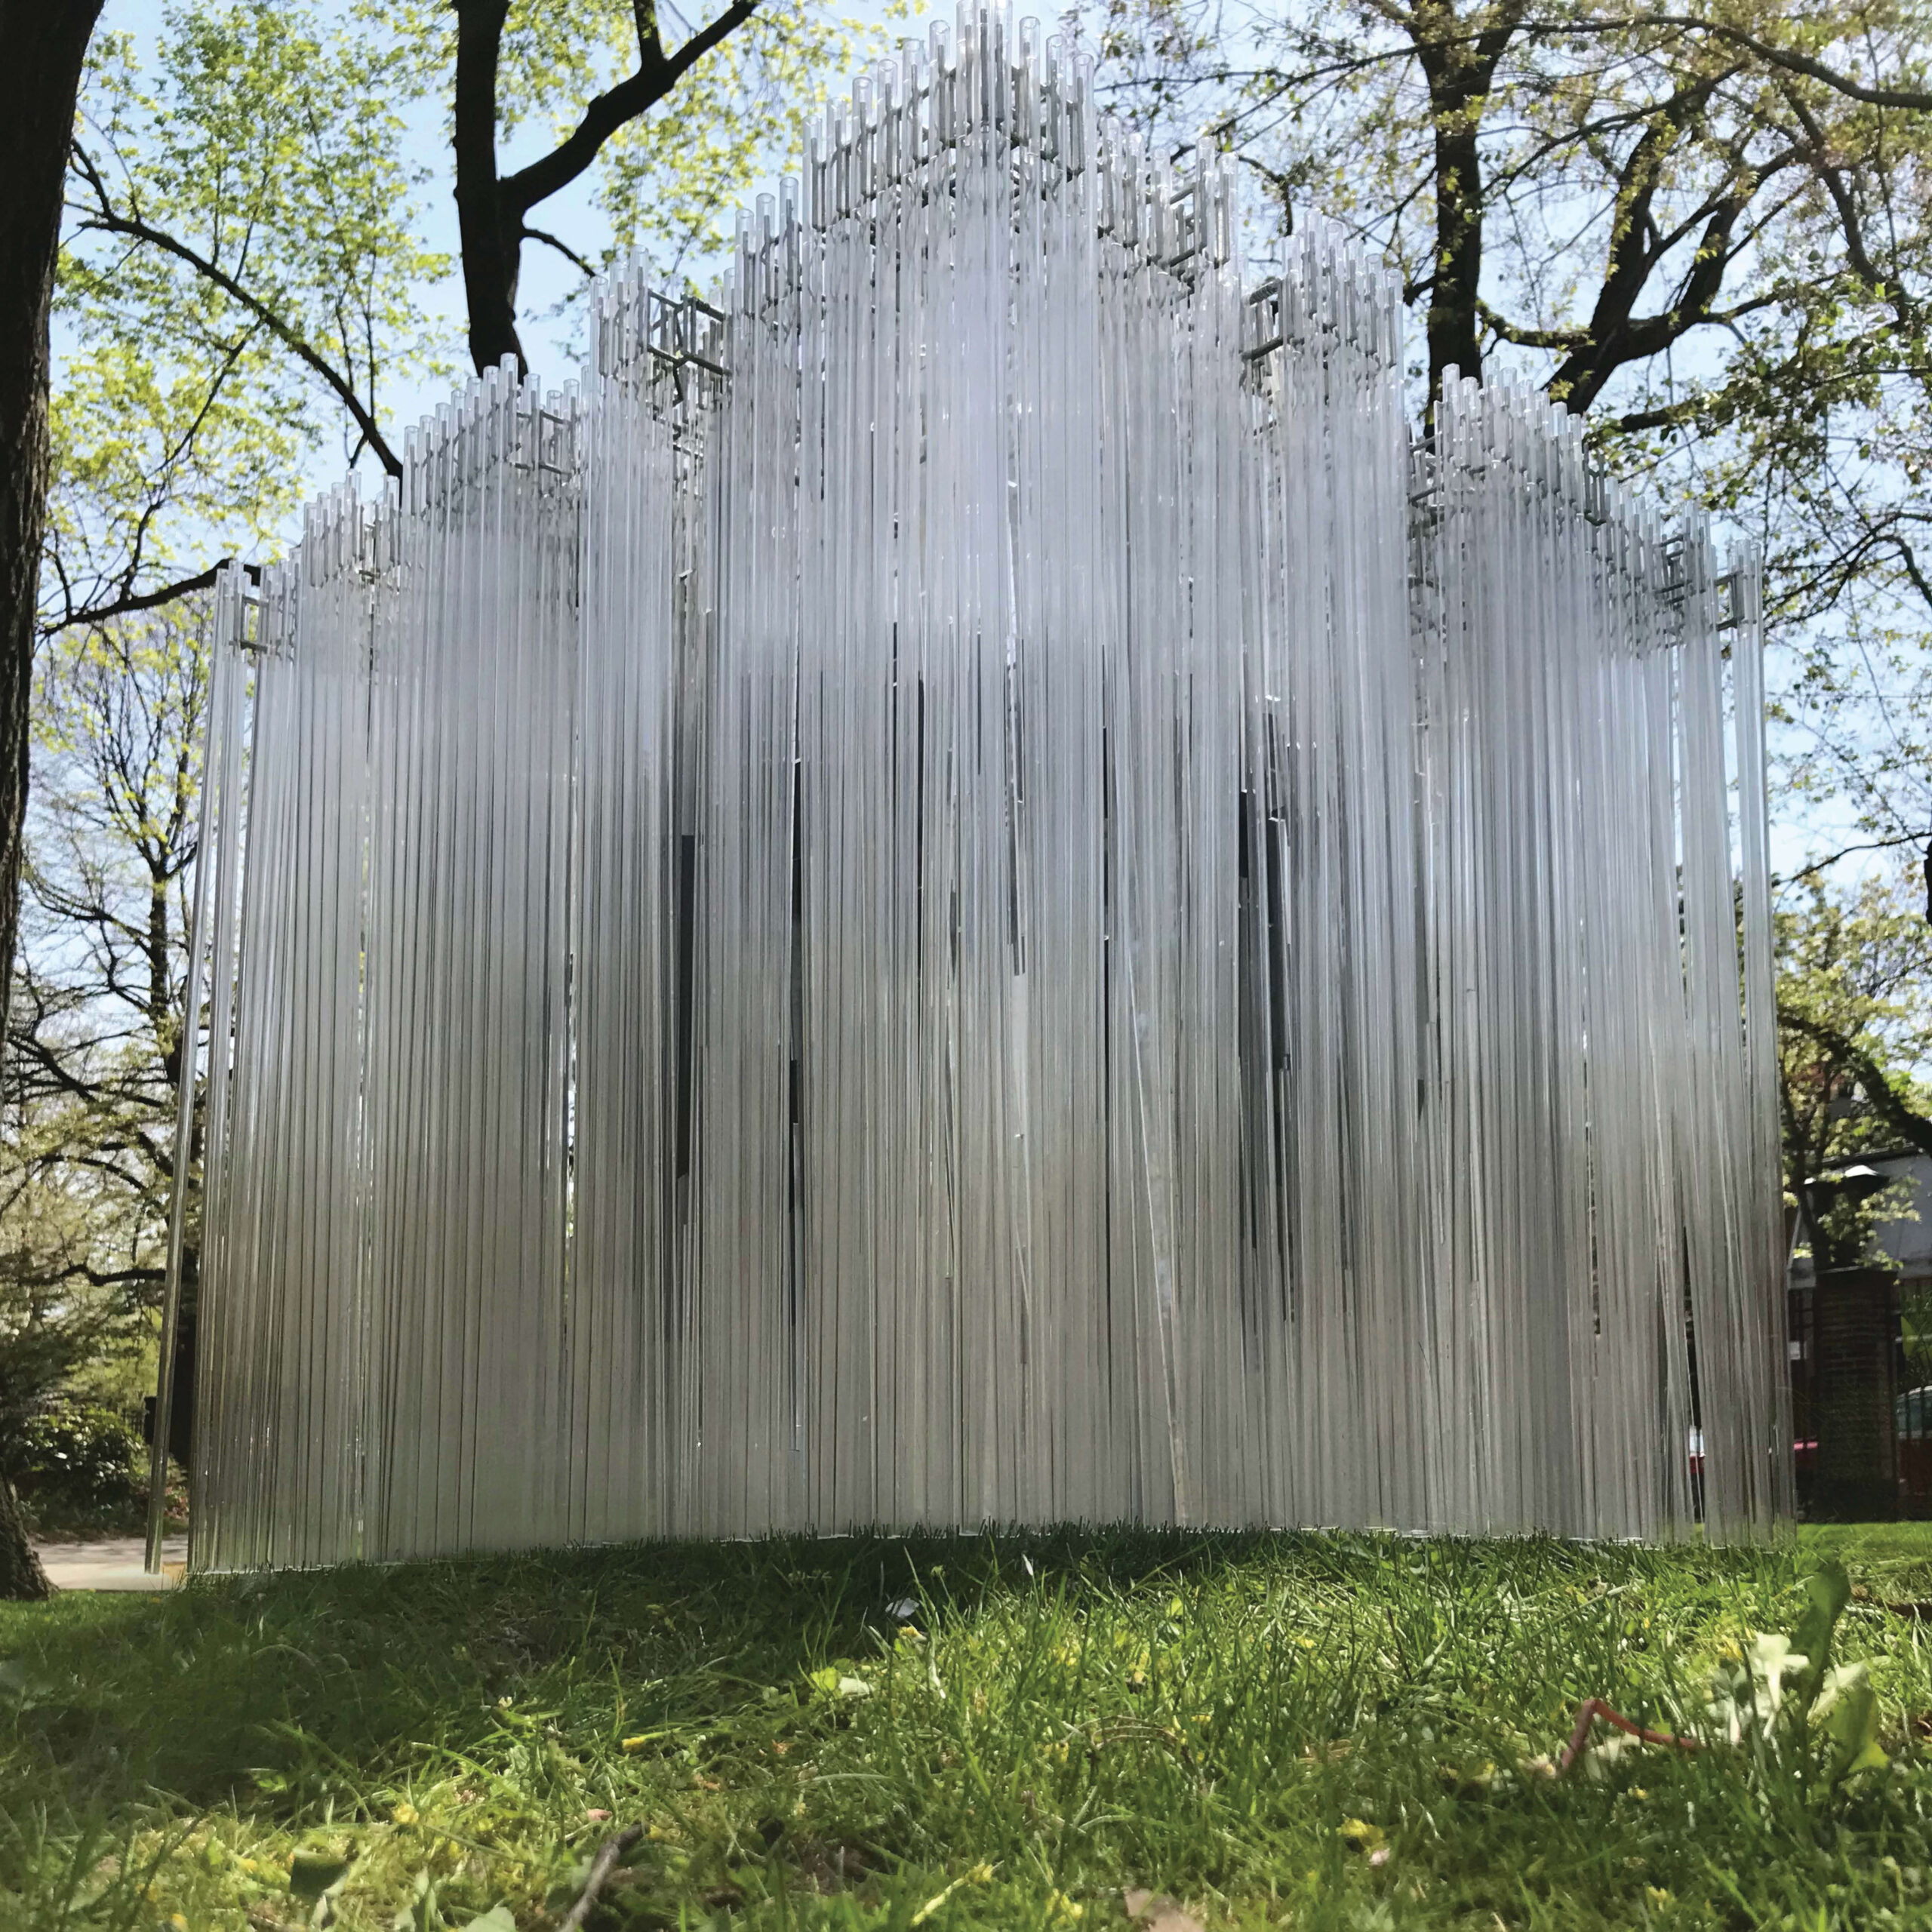 A cubical structure made out of tall glass filaments stands atop grass with trees in the background.